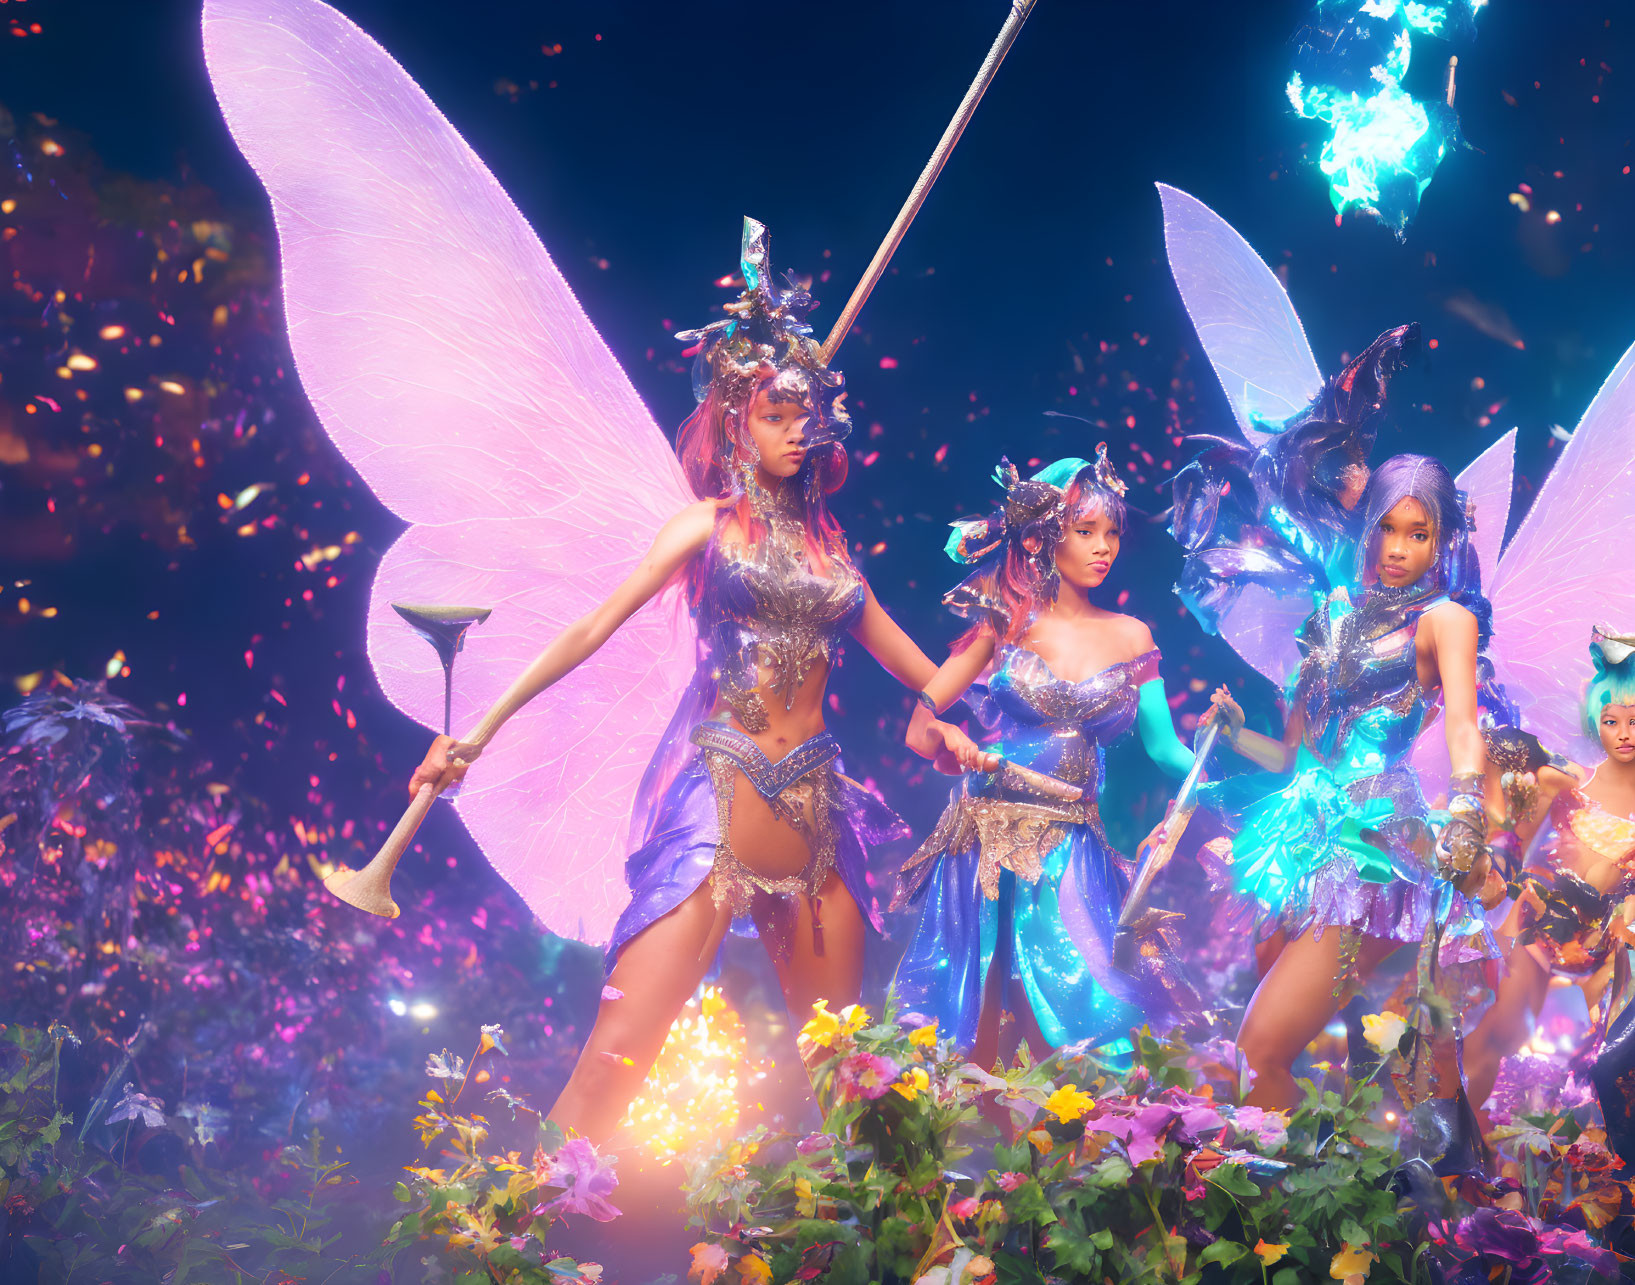 Colorful fairy costumes in magical flower setting with whimsical props